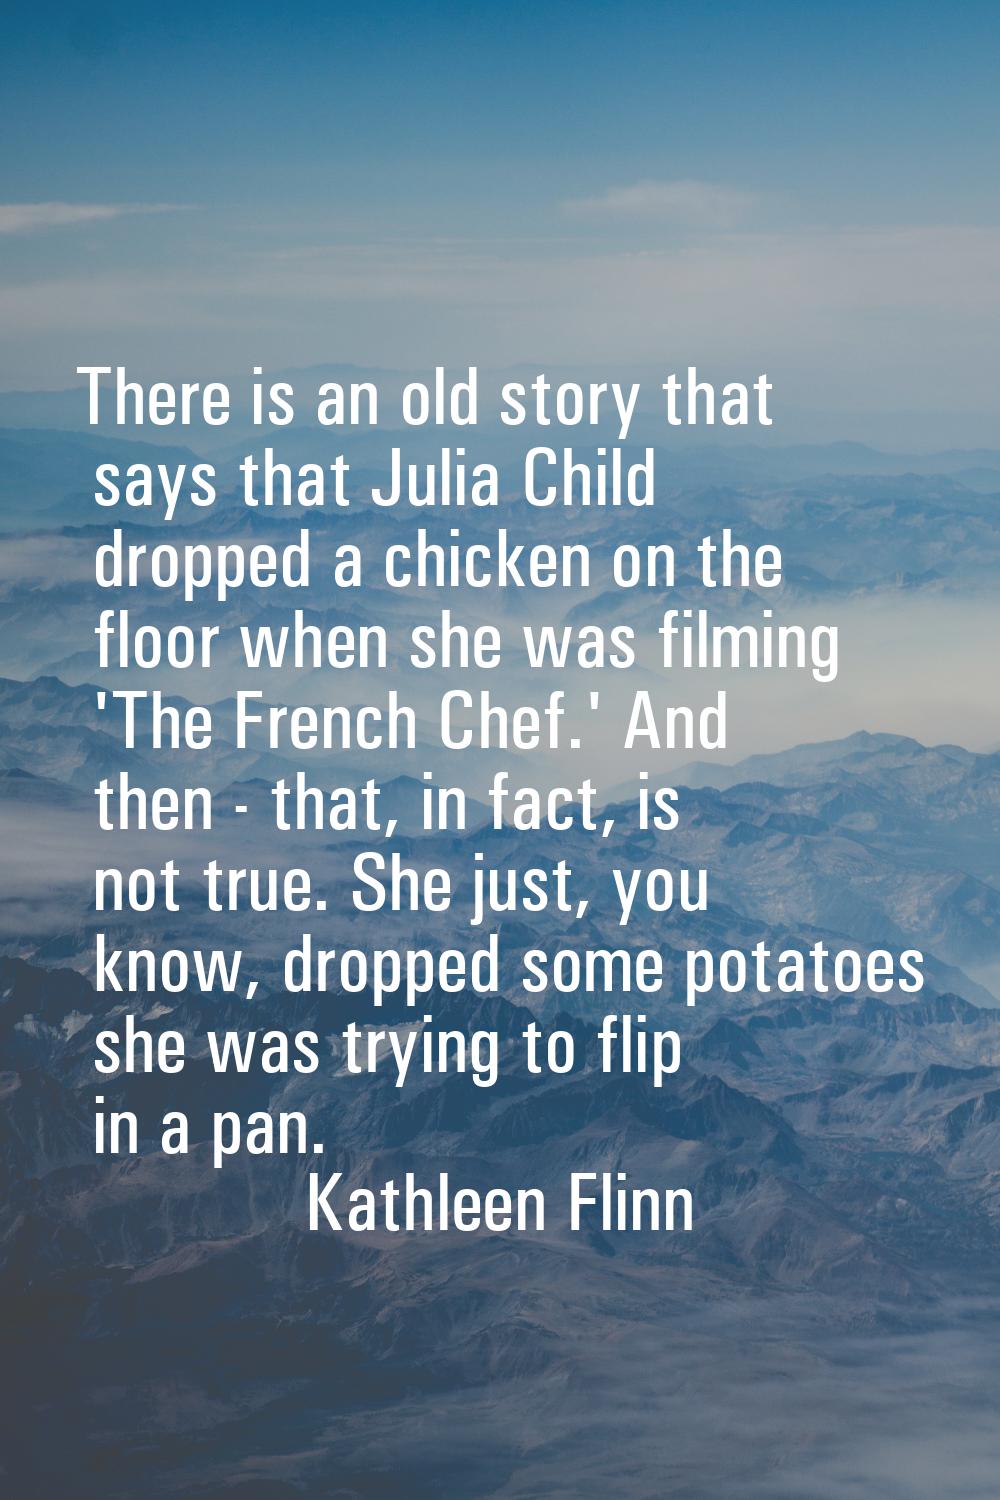 There is an old story that says that Julia Child dropped a chicken on the floor when she was filmin